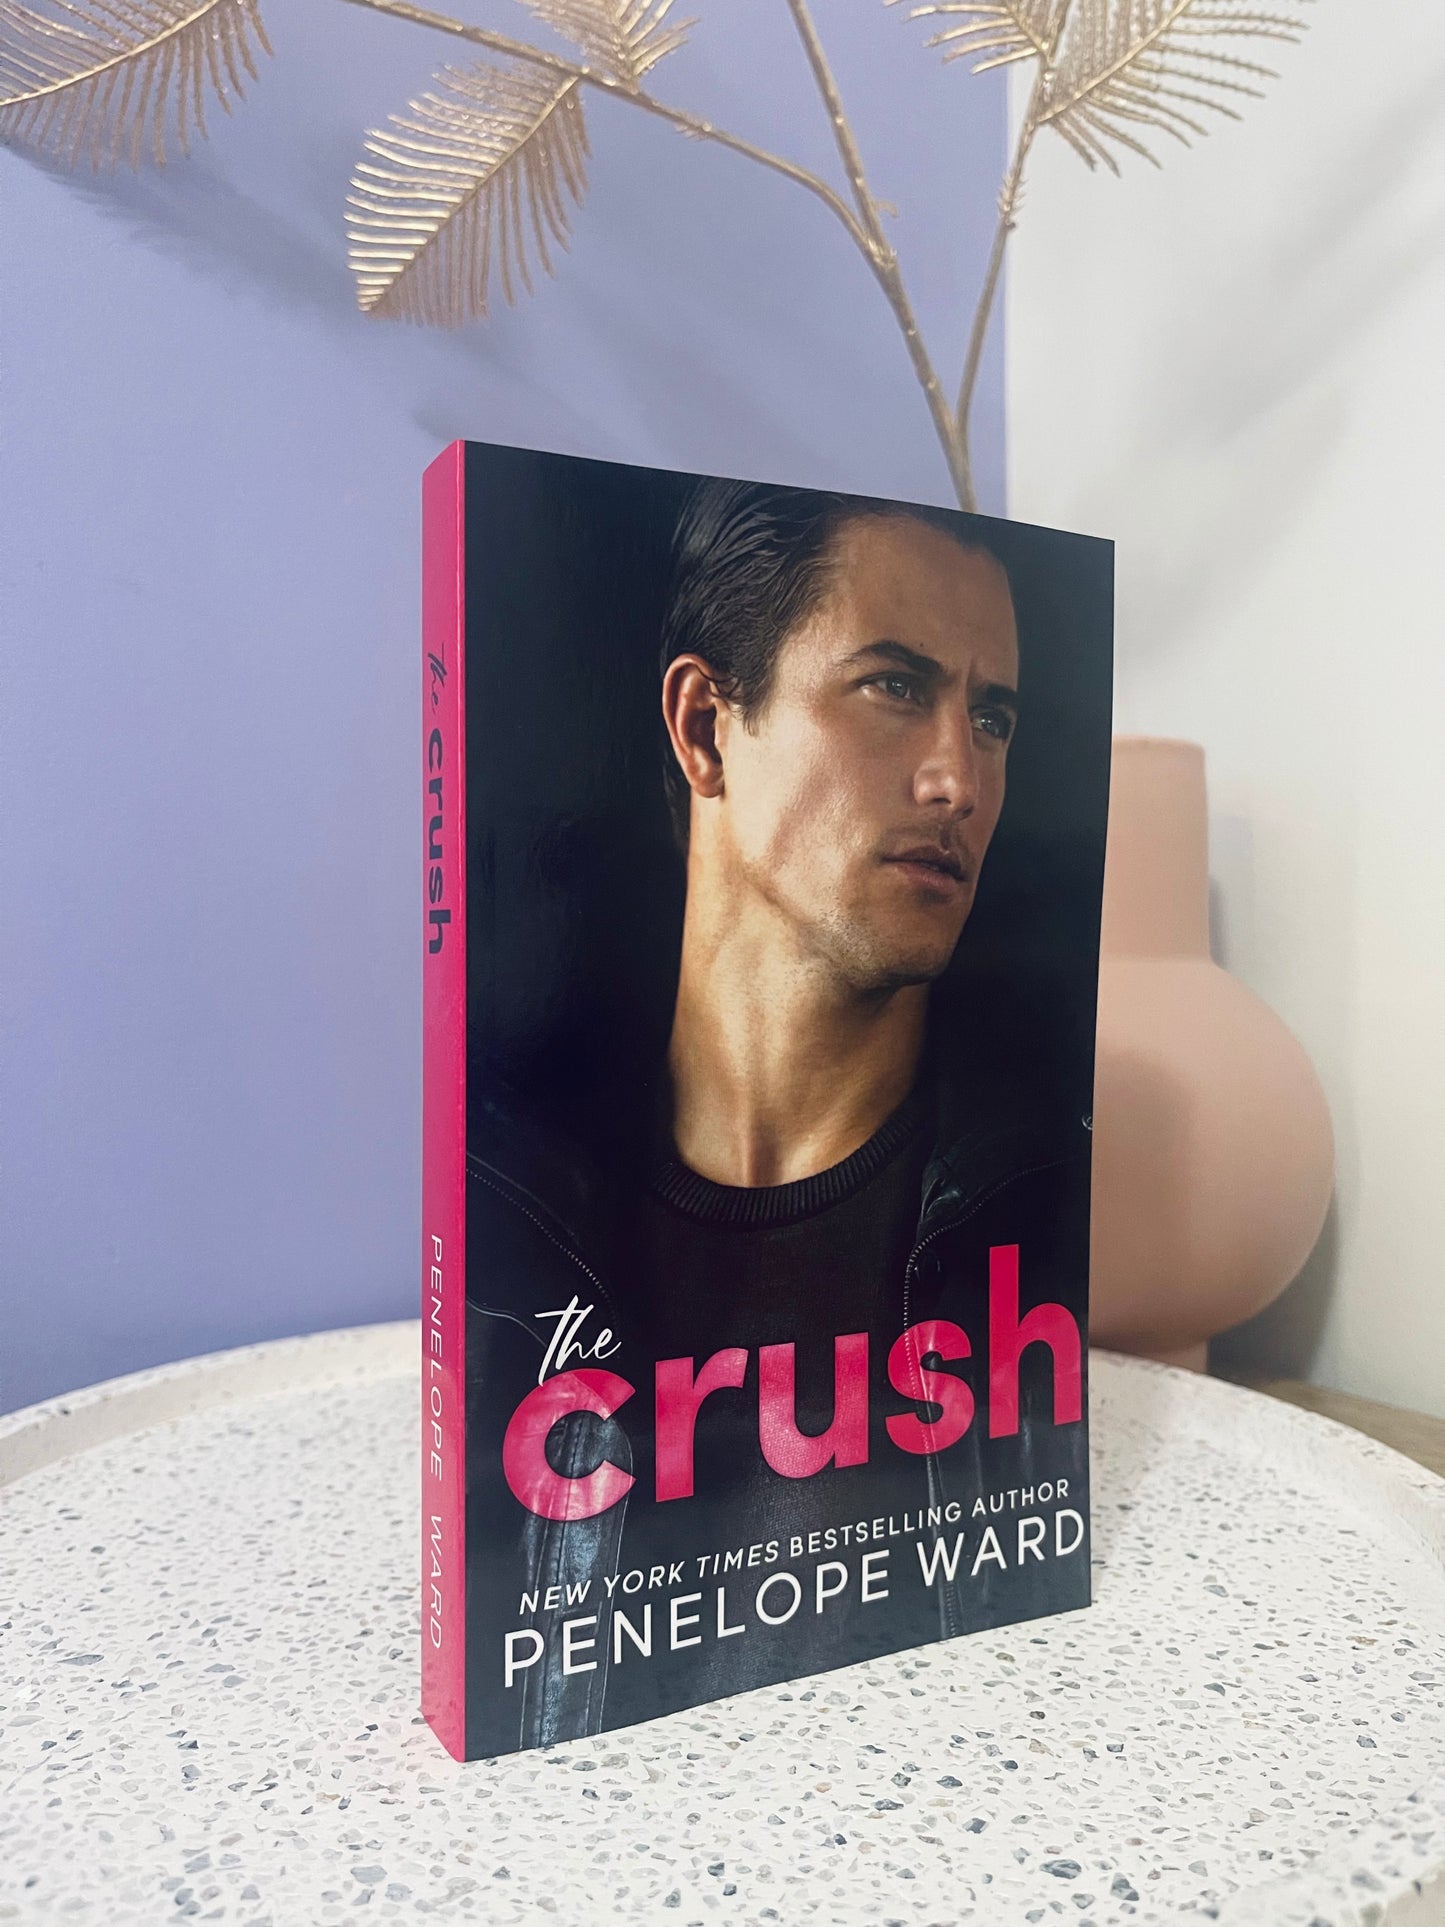 The Crush by Penelope Ward